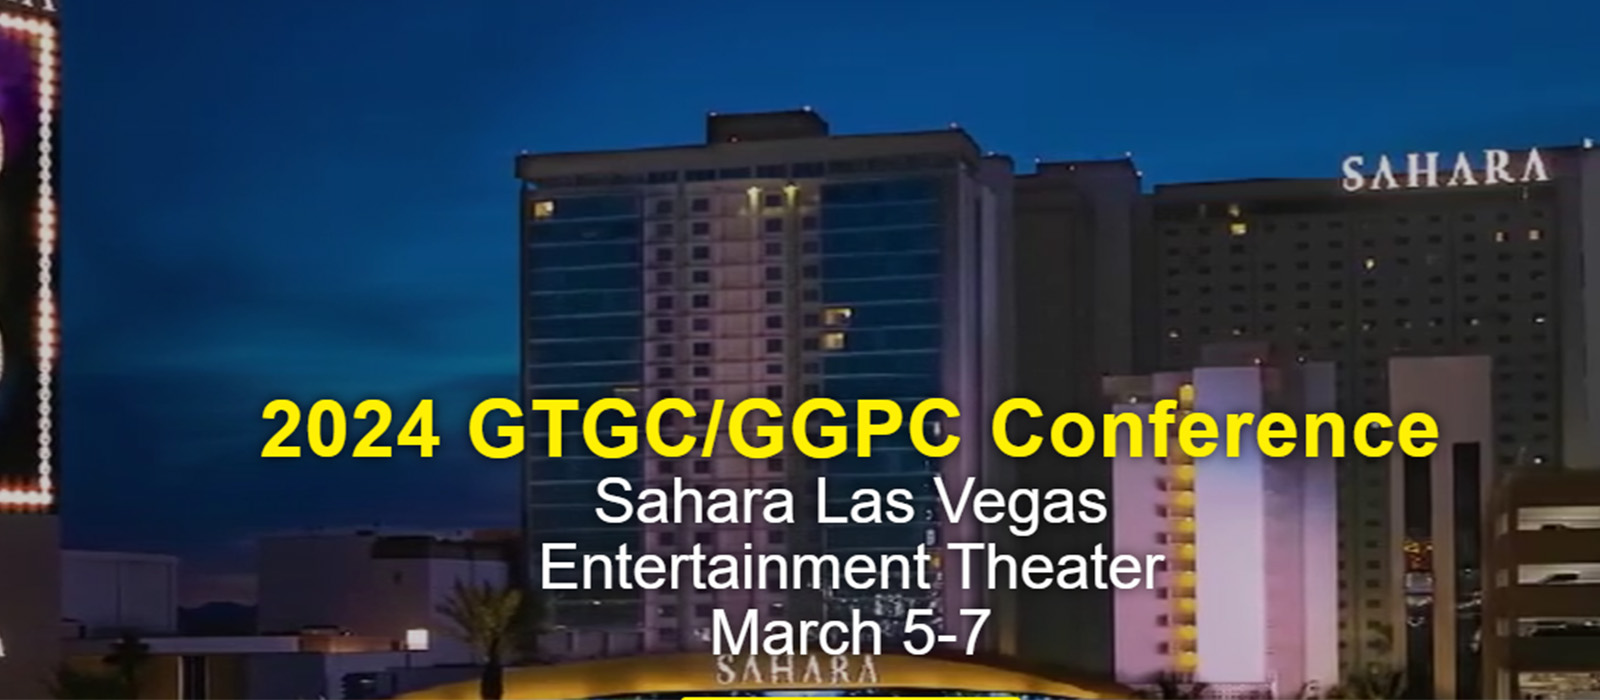 2024 GTGCGGPC Conference banner